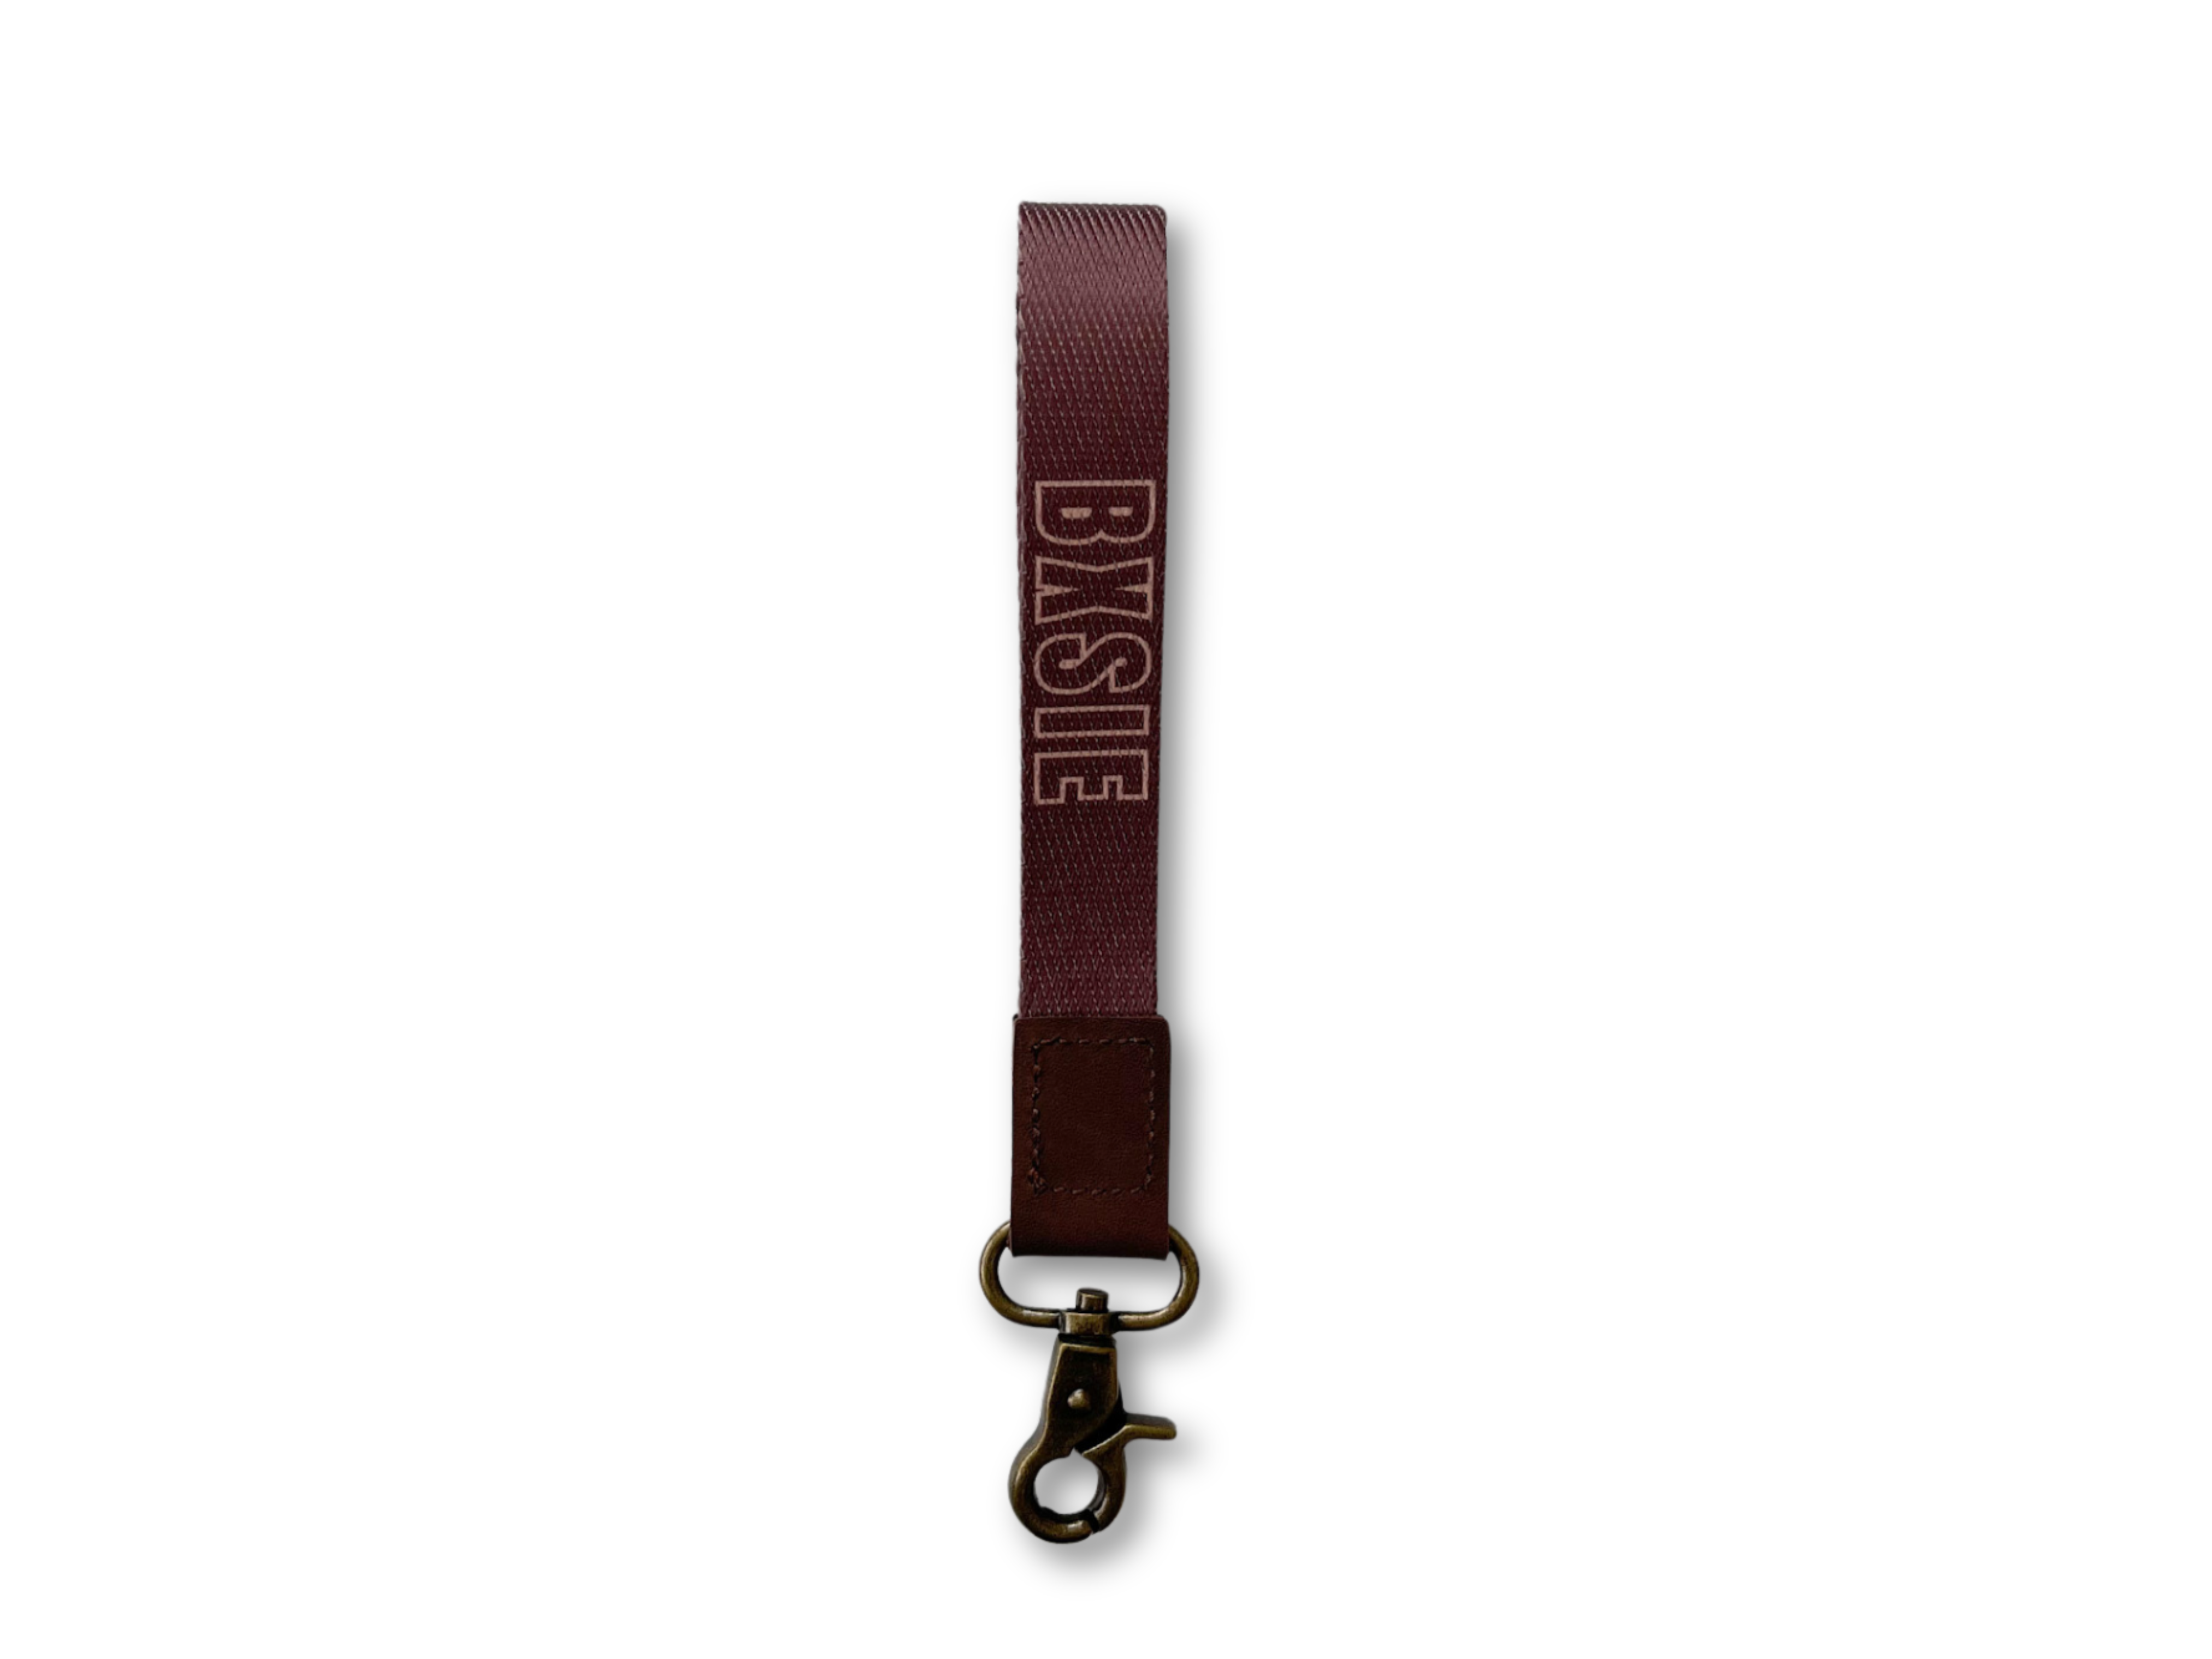 BXSIE keychain wristlet for keys, front view, brown and bronze